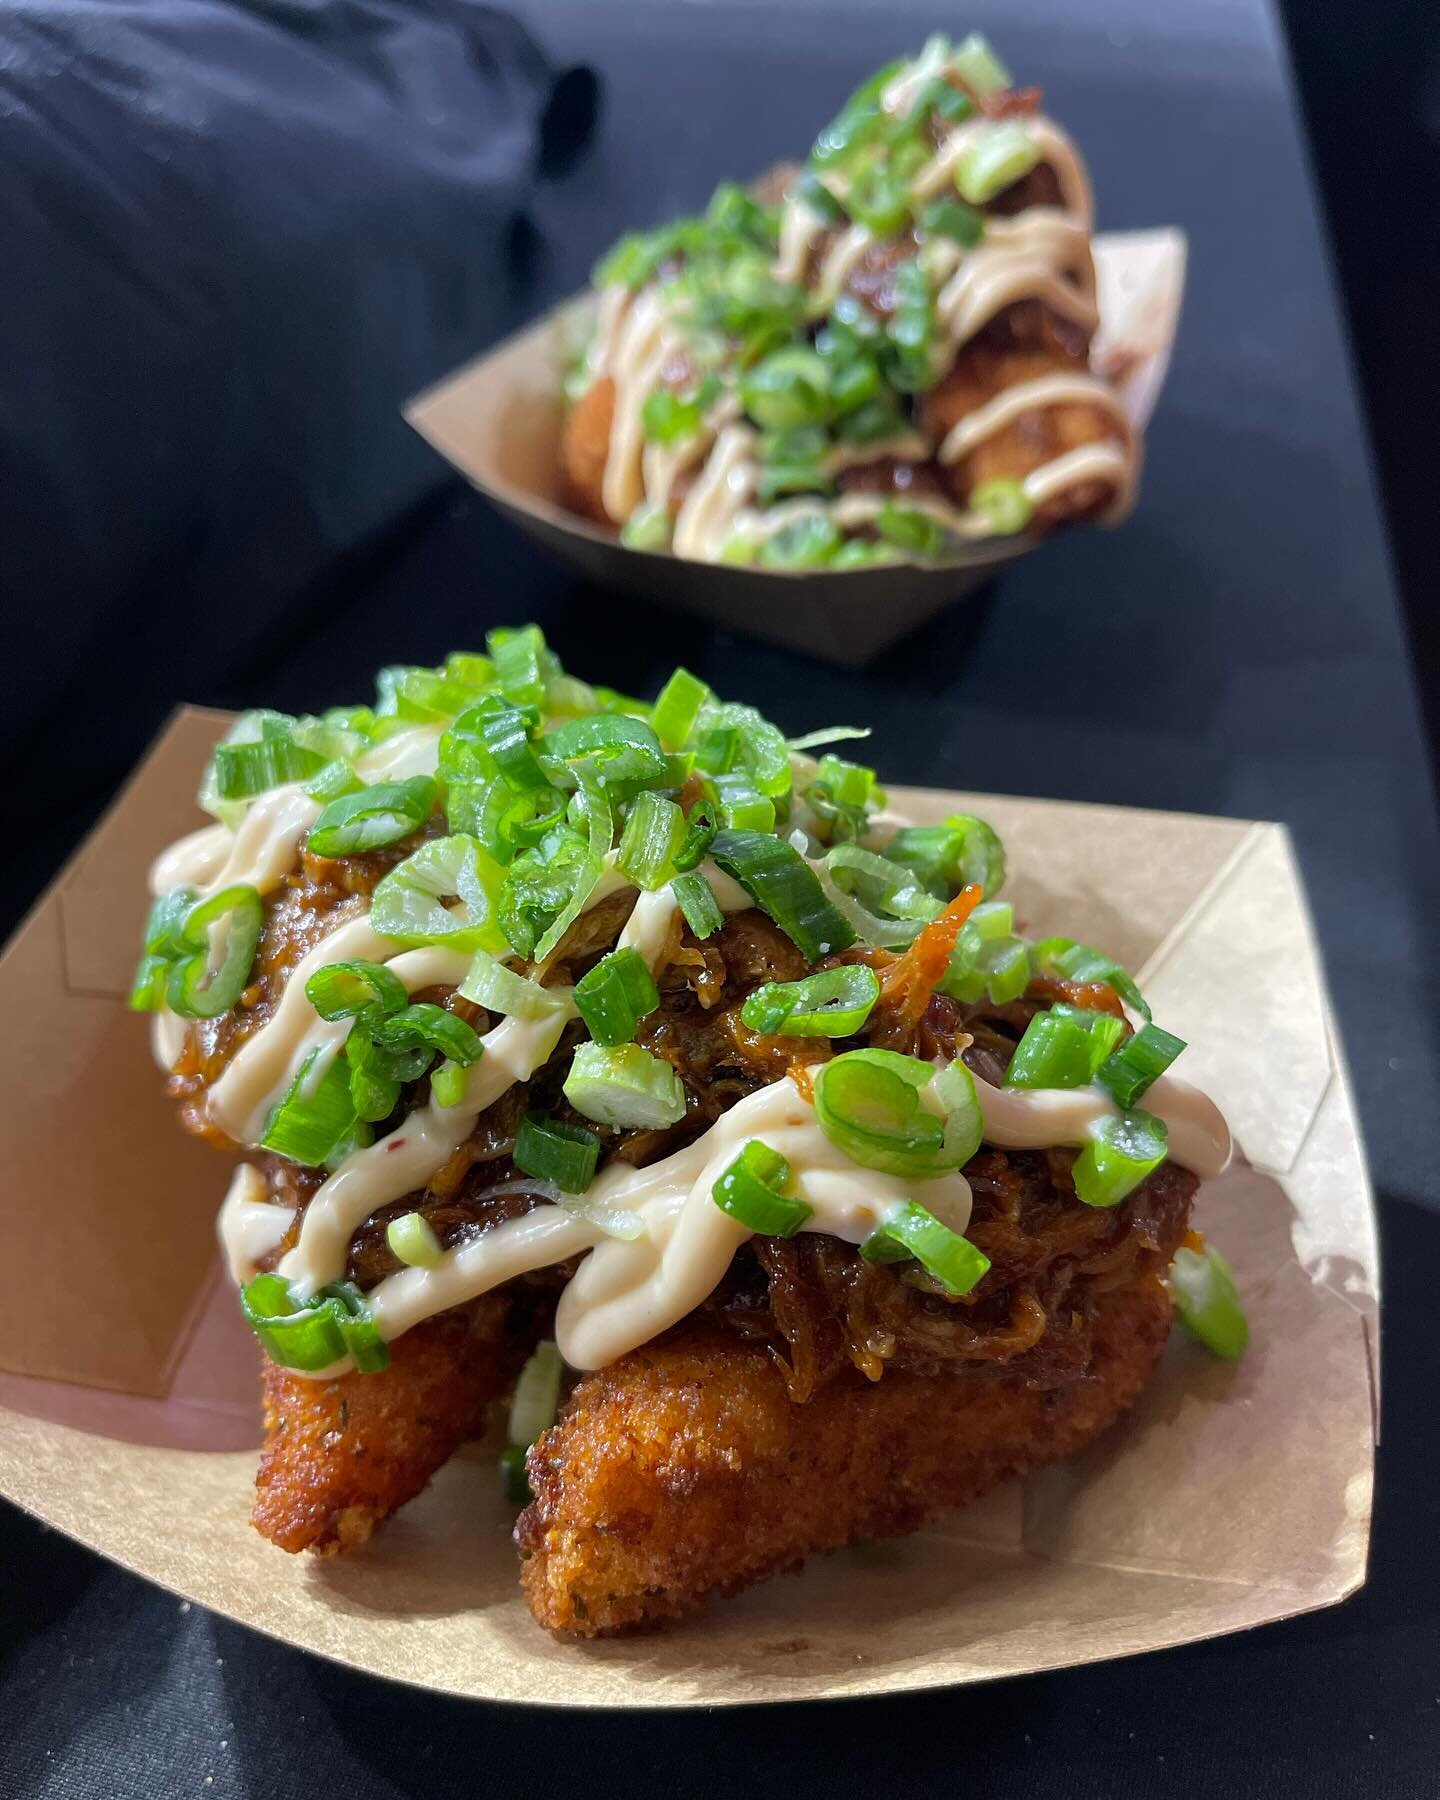 Looking for Sunday plans and craving something delicious?! Visit us for Day 2️⃣ of @njdotcom Jersey Eats Festival from 12-5pm at @curearena 

Pictured: Loaded Mac-N-Cheese
(Fried Mac and Cheese topped with BBQ pulled pork, chipotle aioli &amp; scalli